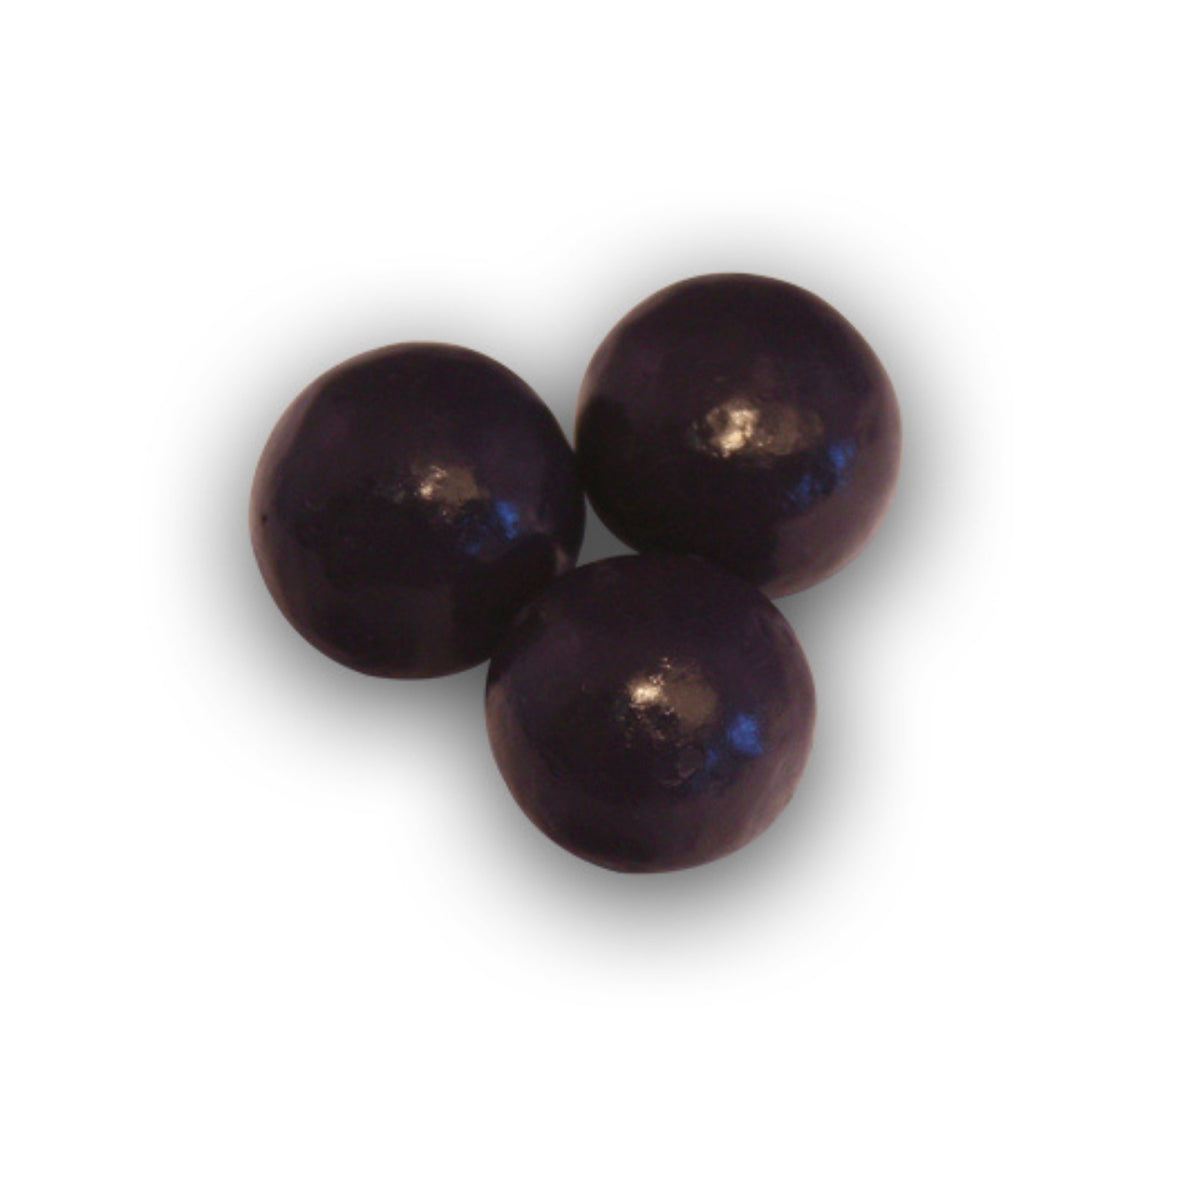 Dilettante Chocolates Chocolate-Covered Blueberries colored to a dark blue hue